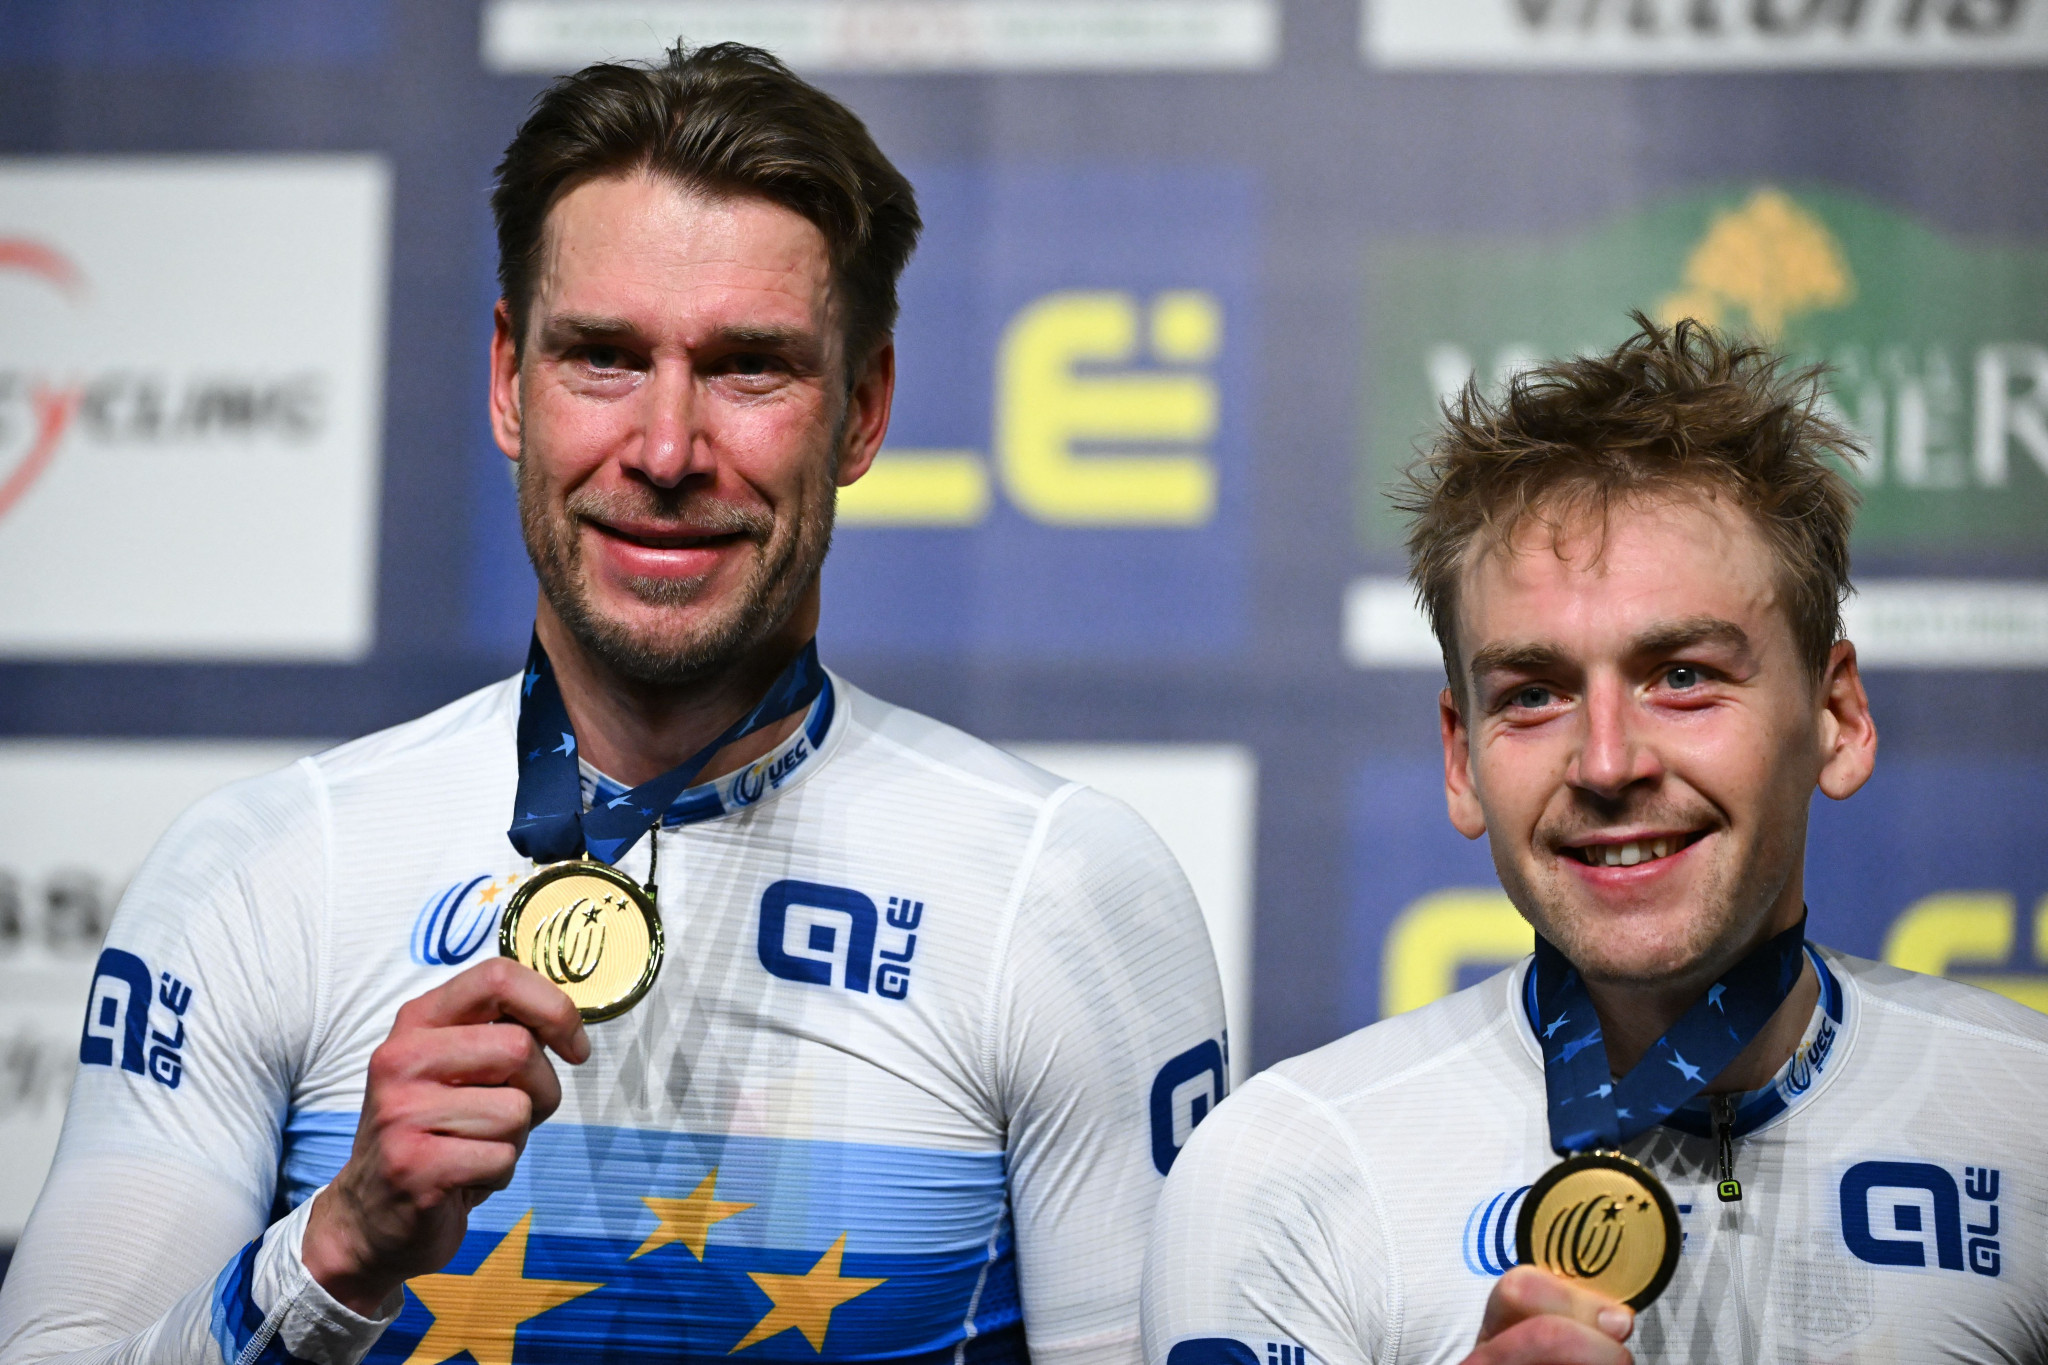 Roger Kluge, left, and Theo Reinhardt, right, won men's madison gold for Germany at the Track European Championships ©Getty Images